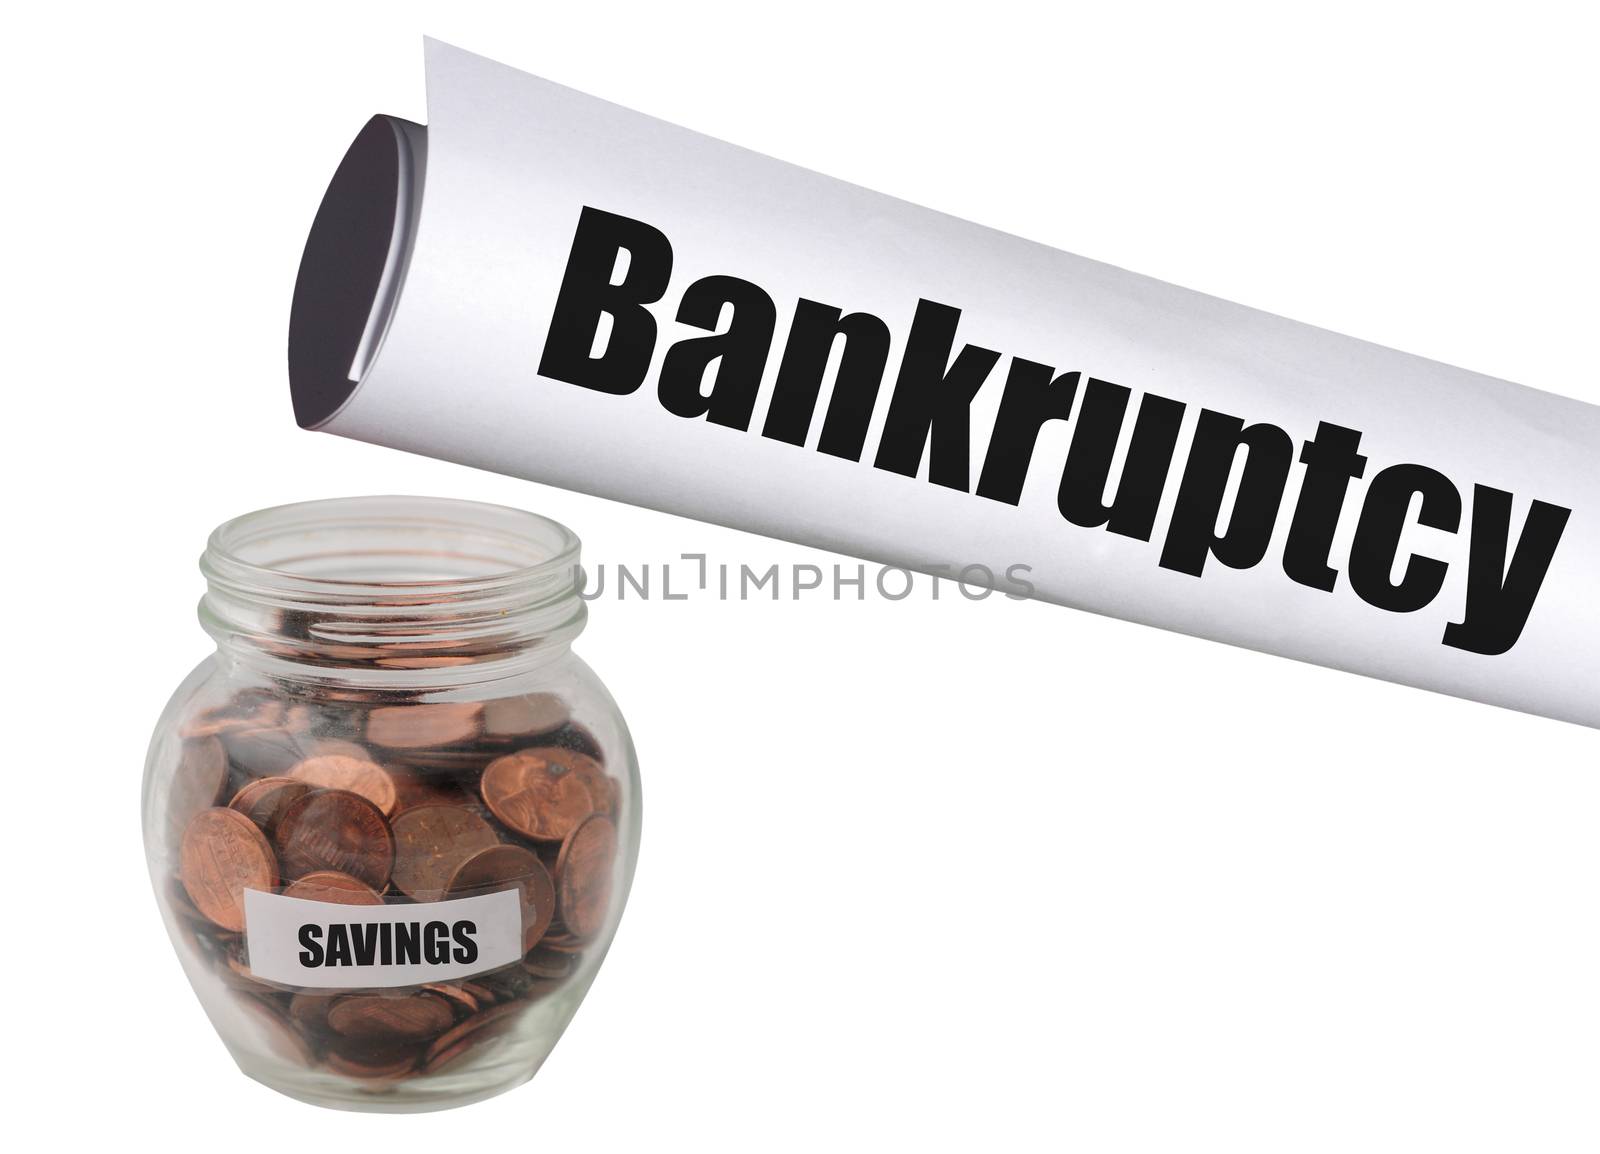 running out of savings and filing for bankruptcy